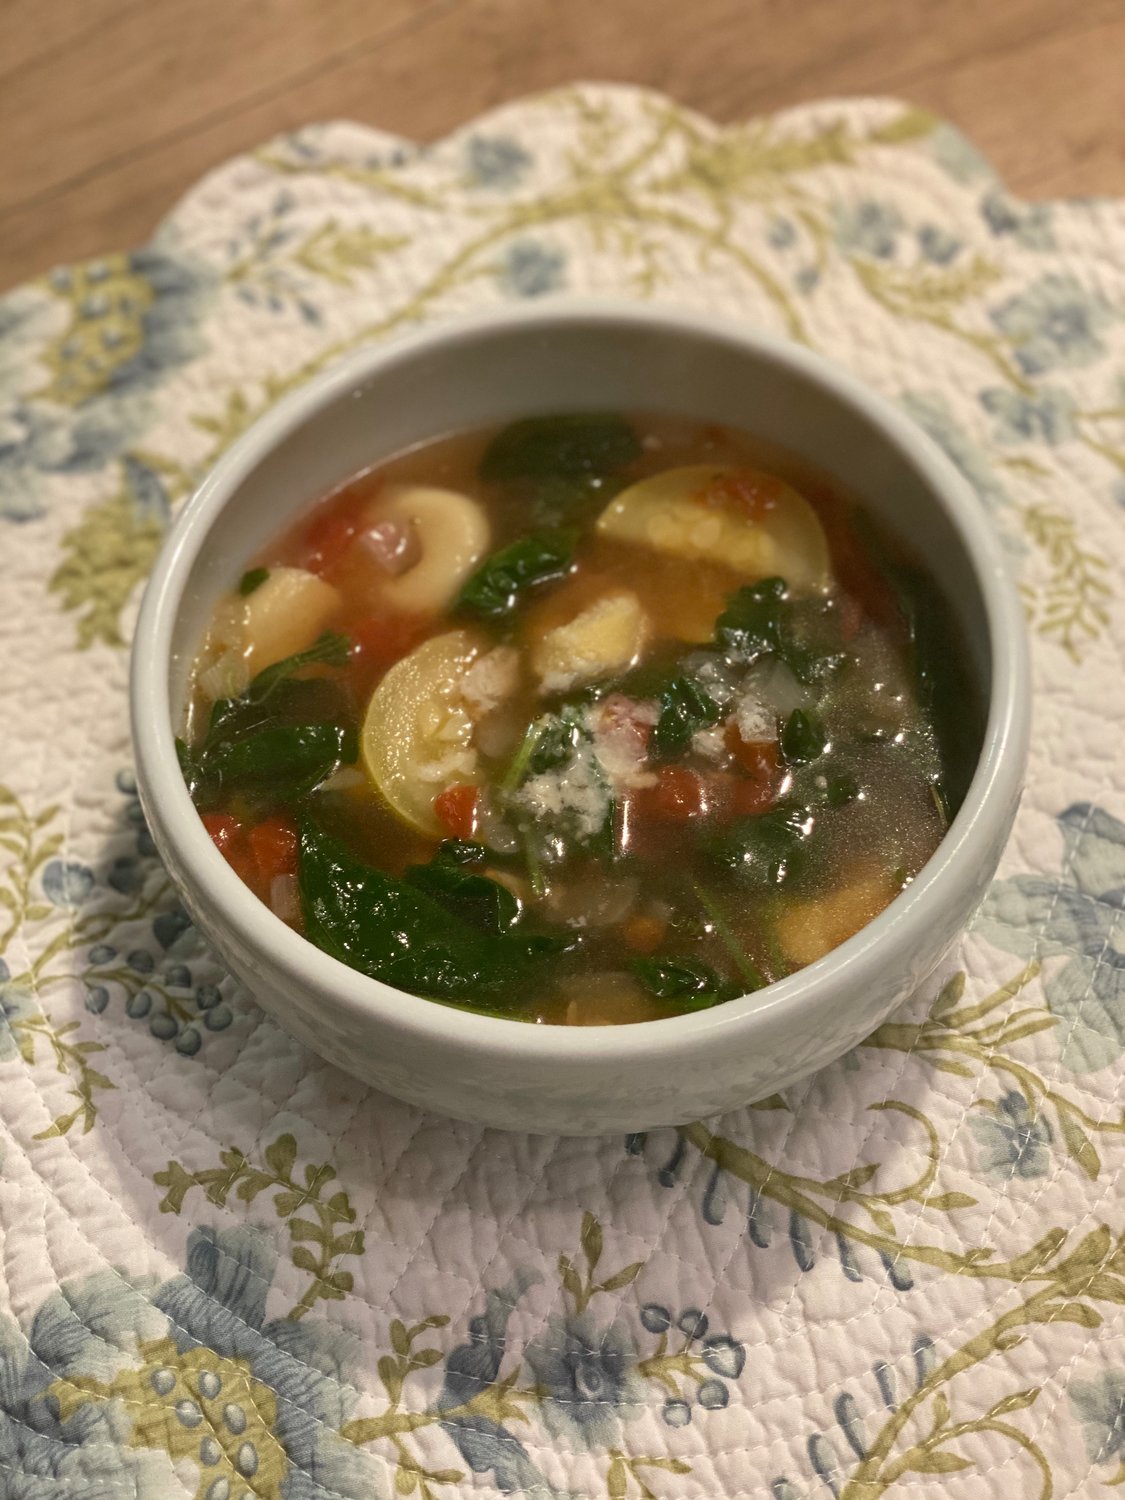 Lately this time of year I love making soup and bringing it for lunch a few days in a row or freezing it for later use.